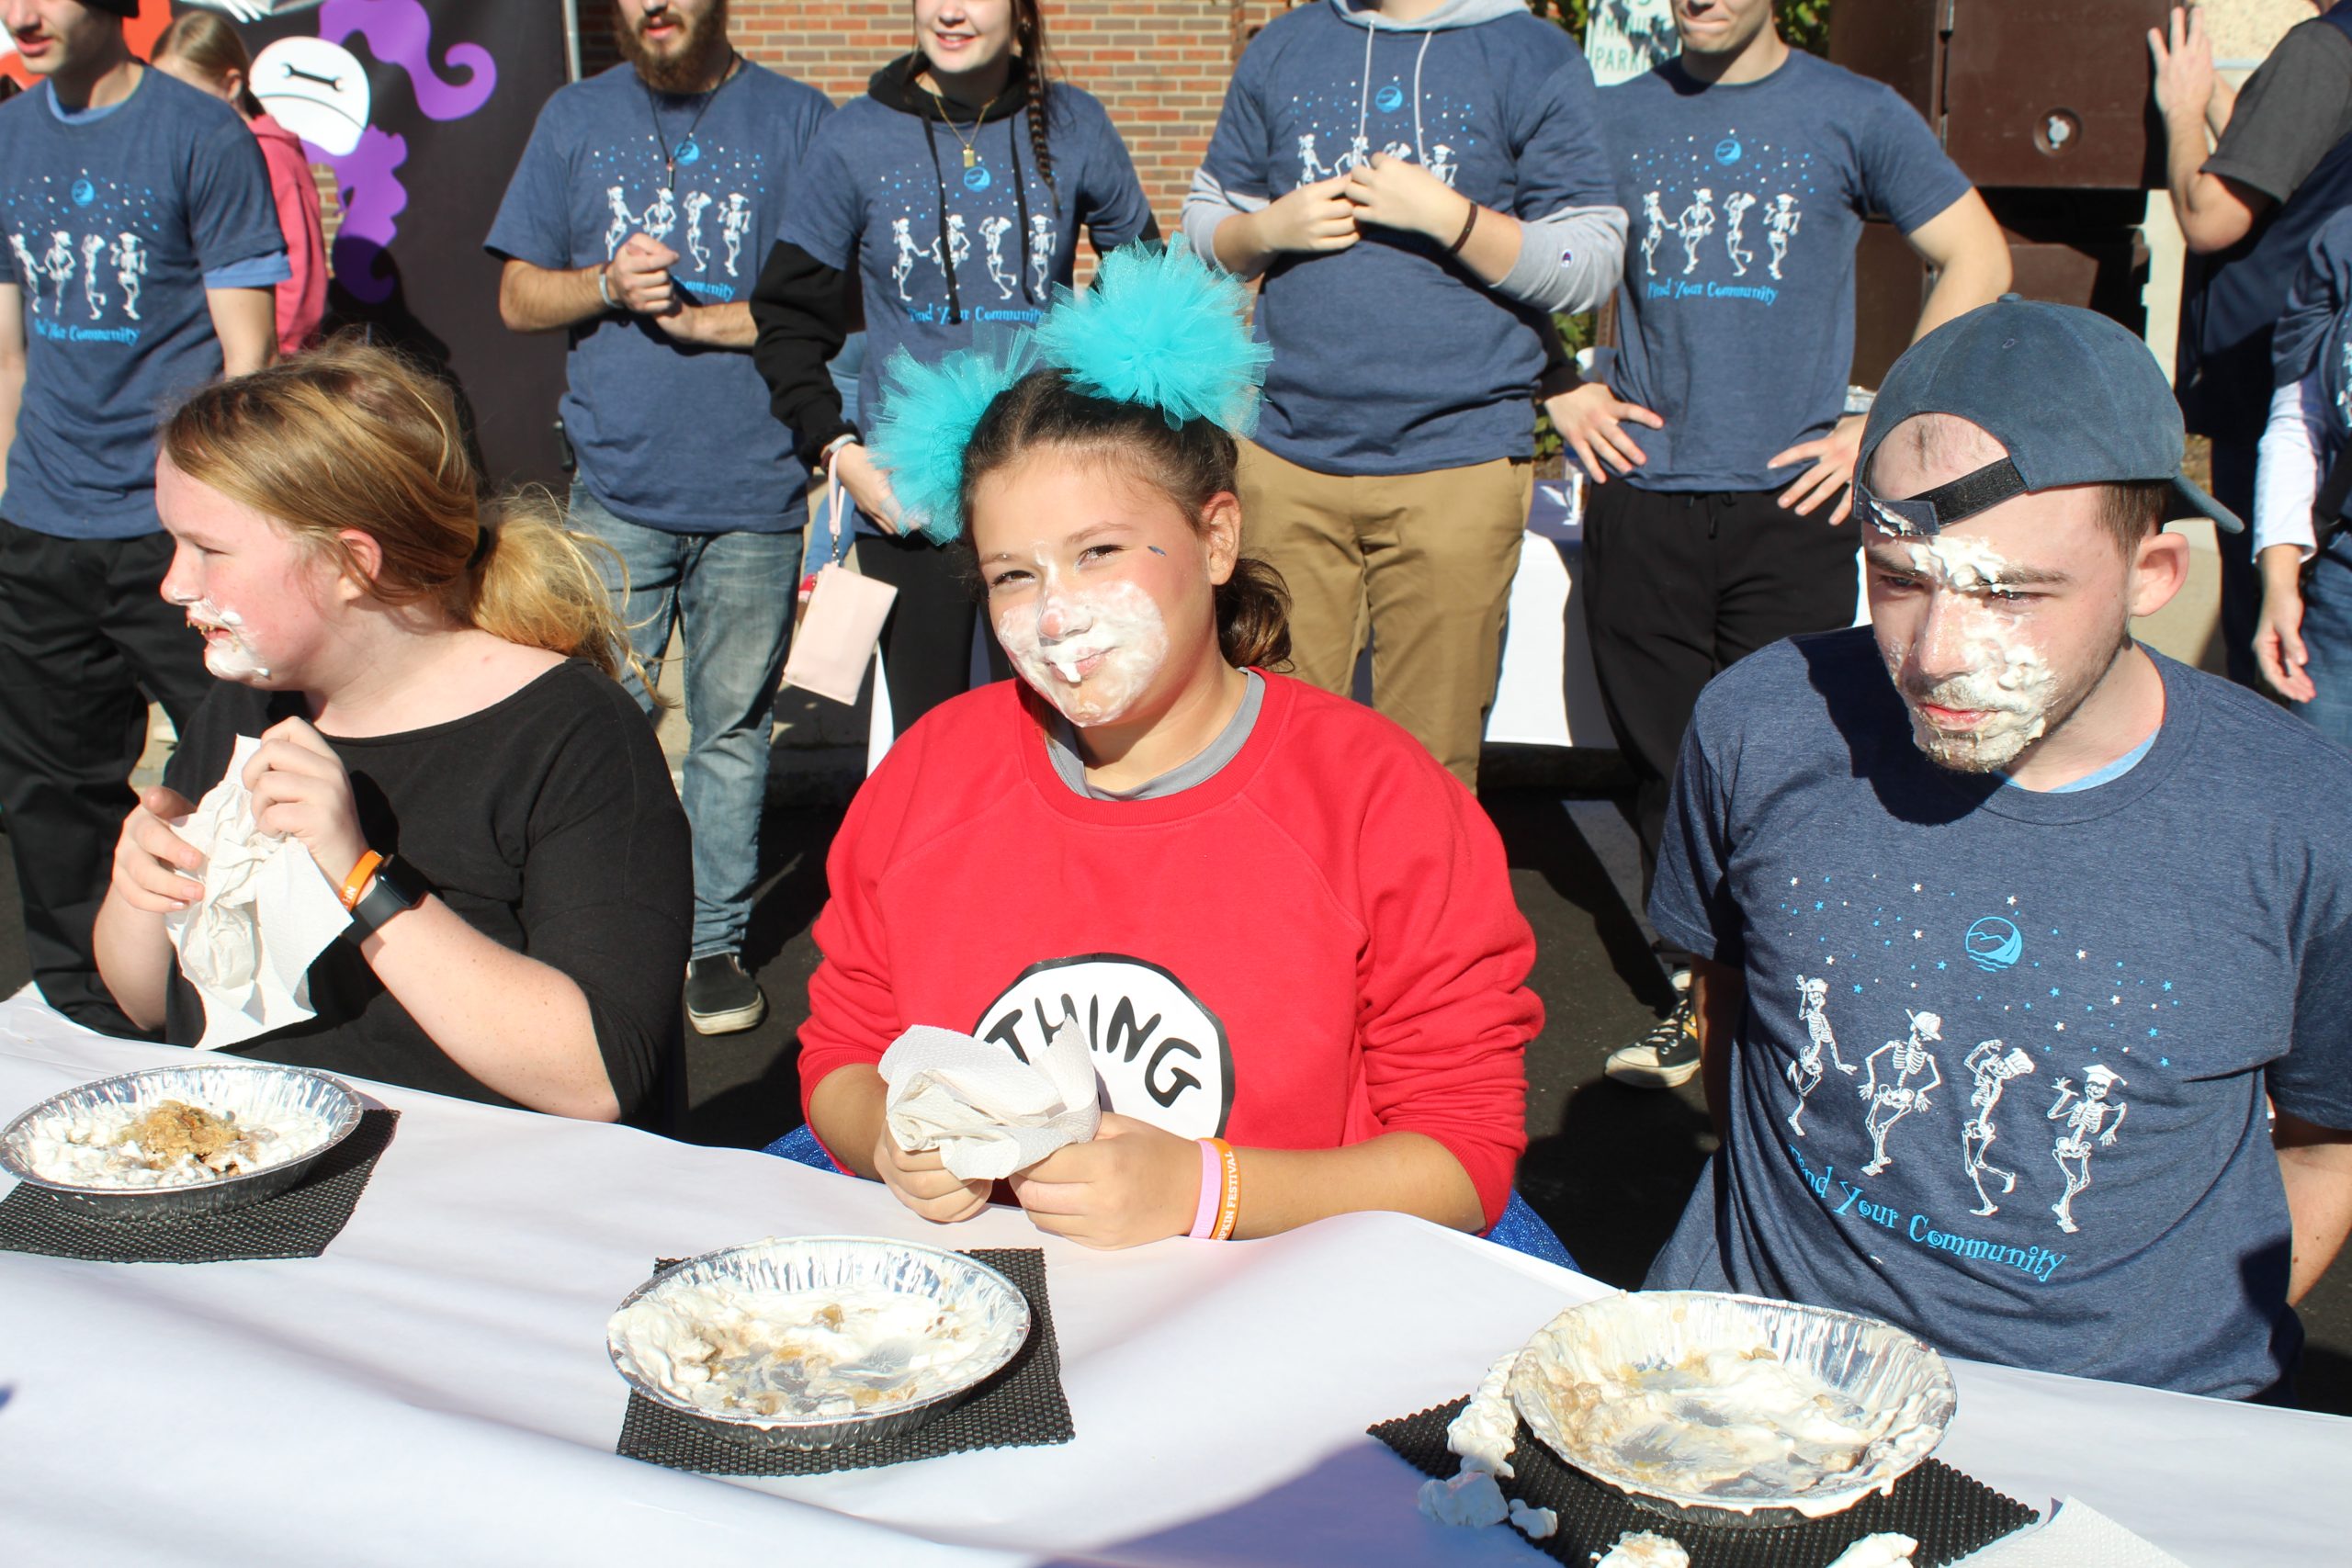 Lakes Region 2nd Annual Pie Eating Contest